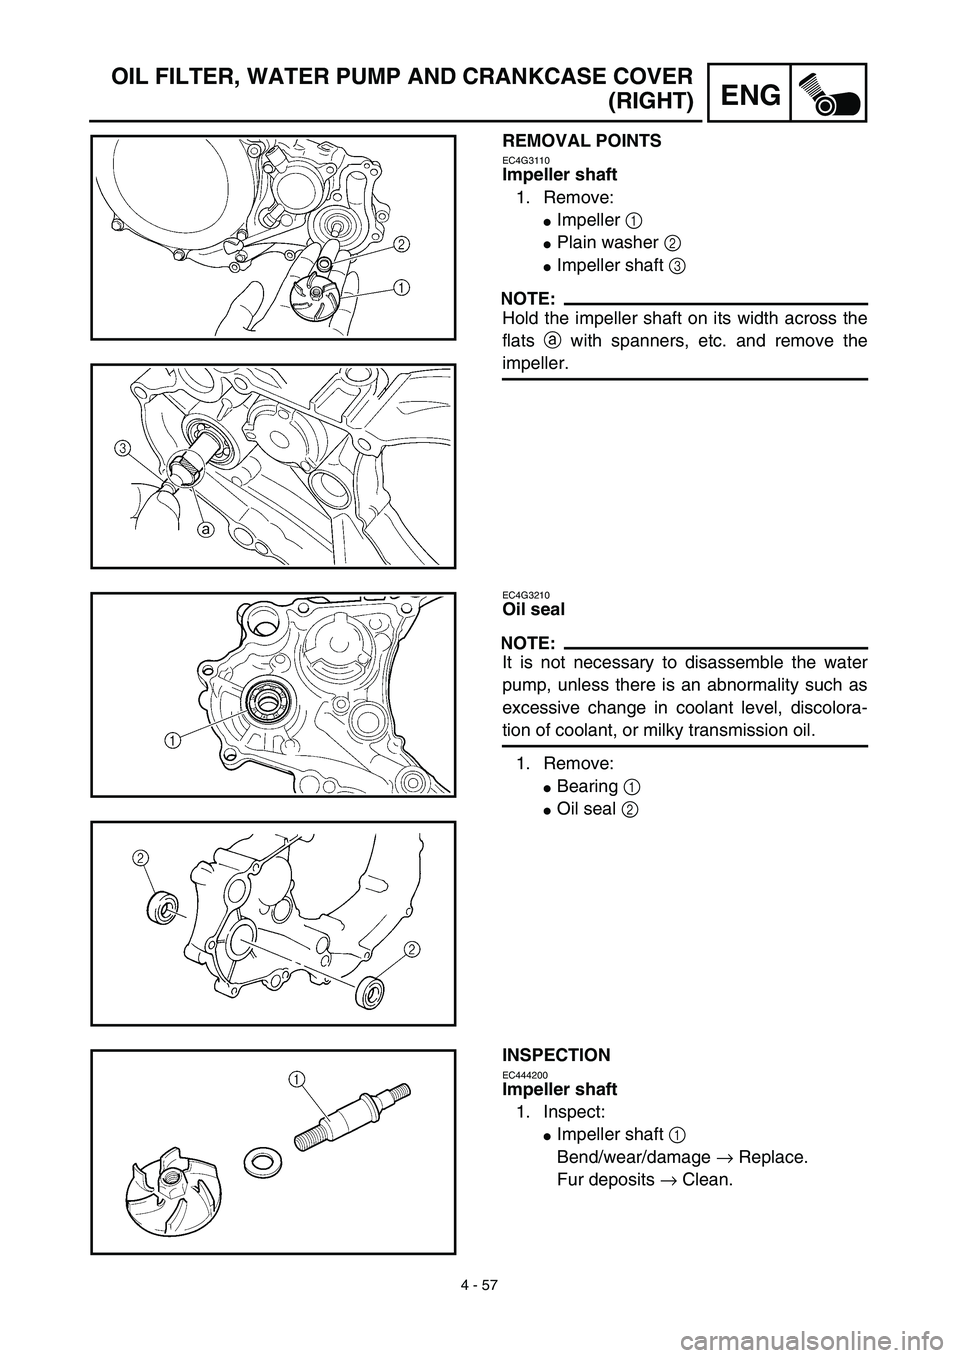 YAMAHA WR 450F 2003  Owners Manual 4 - 57
ENG
OIL FILTER, WATER PUMP AND CRANKCASE COVER
(RIGHT)
REMOVAL POINTS
EC4G3110
Impeller shaft
1. Remove:
Impeller 1 
Plain washer 2 
Impeller shaft 3 
NOTE:
Hold the impeller shaft on its wi